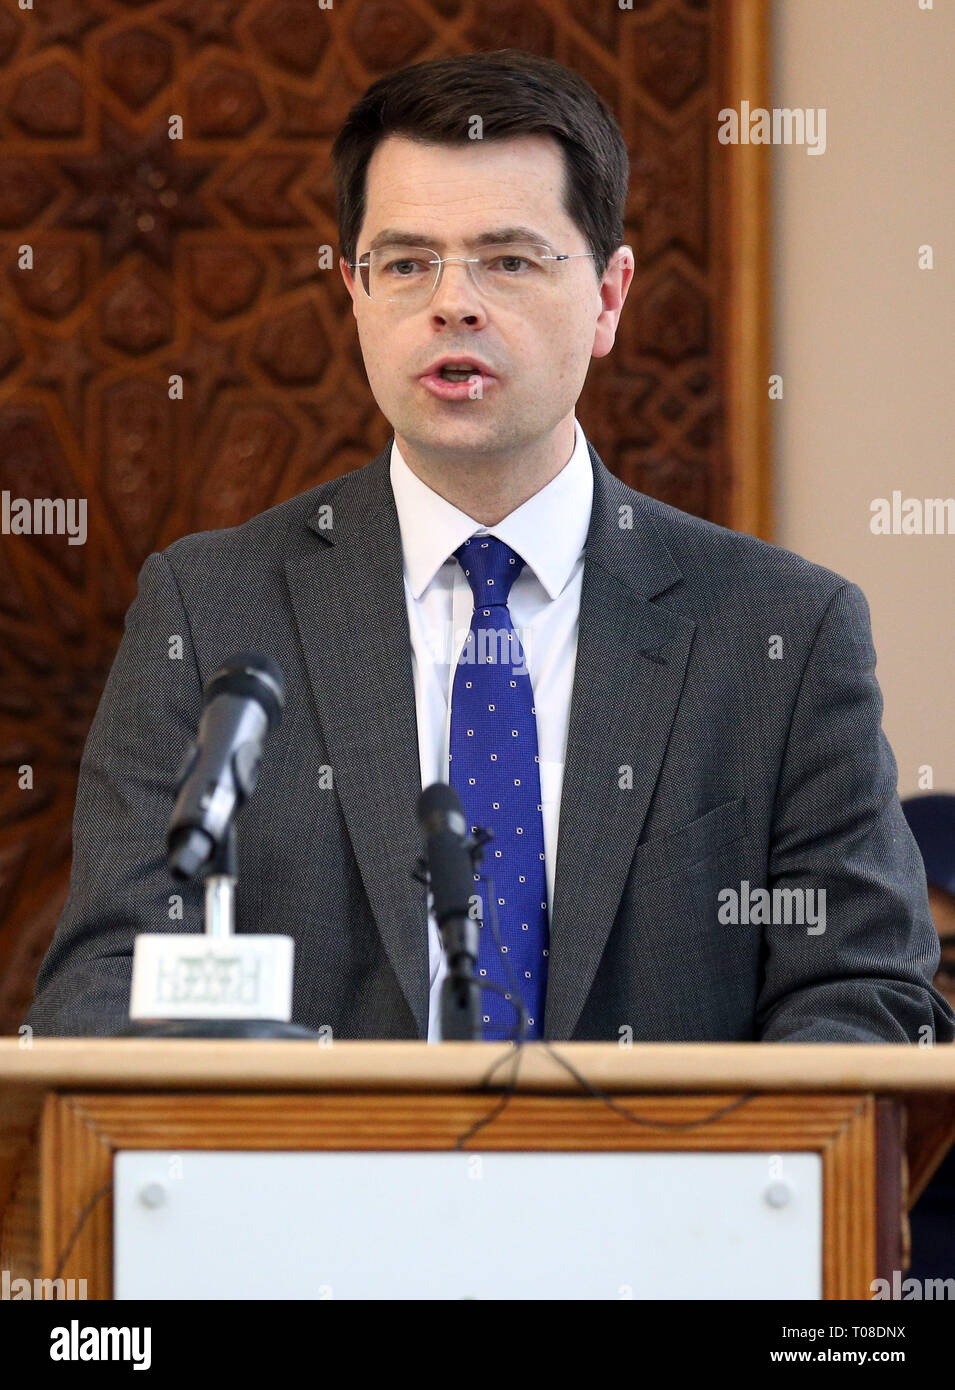 Secretary of State for Housing, Communities and Local Government, James Brokenshire, speaks at an Acting in Solidarity event held at Regents Park Mosque in north London, following Friday's attack on two mosques in Christchurch, New Zealand which killed 50 people. Stock Photo